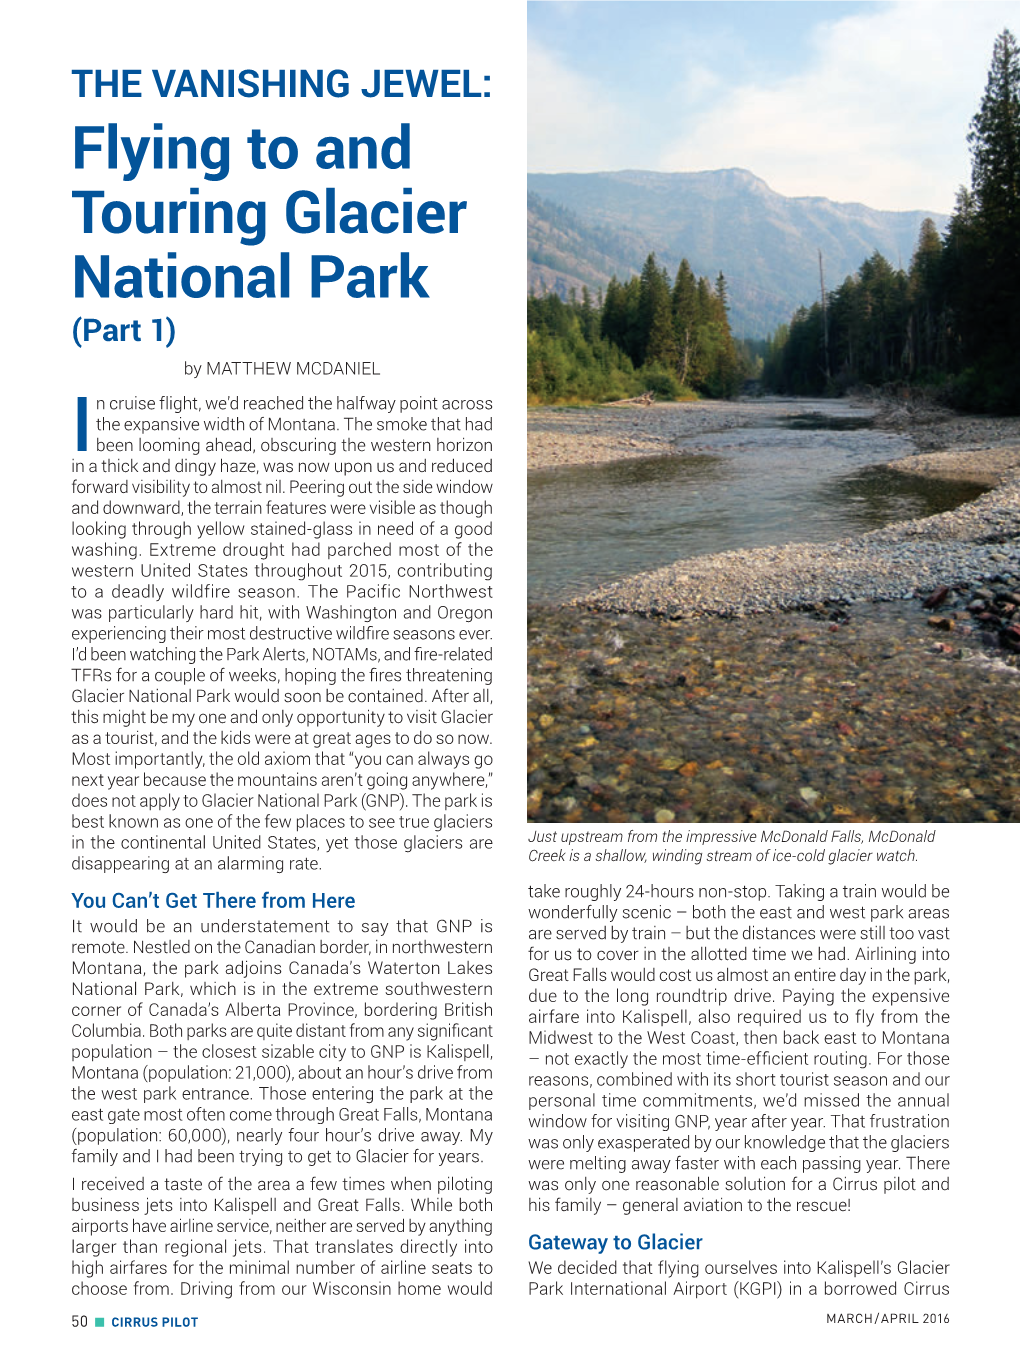 The Vanishing Jewel: Flying to and Touring Glacier National Park